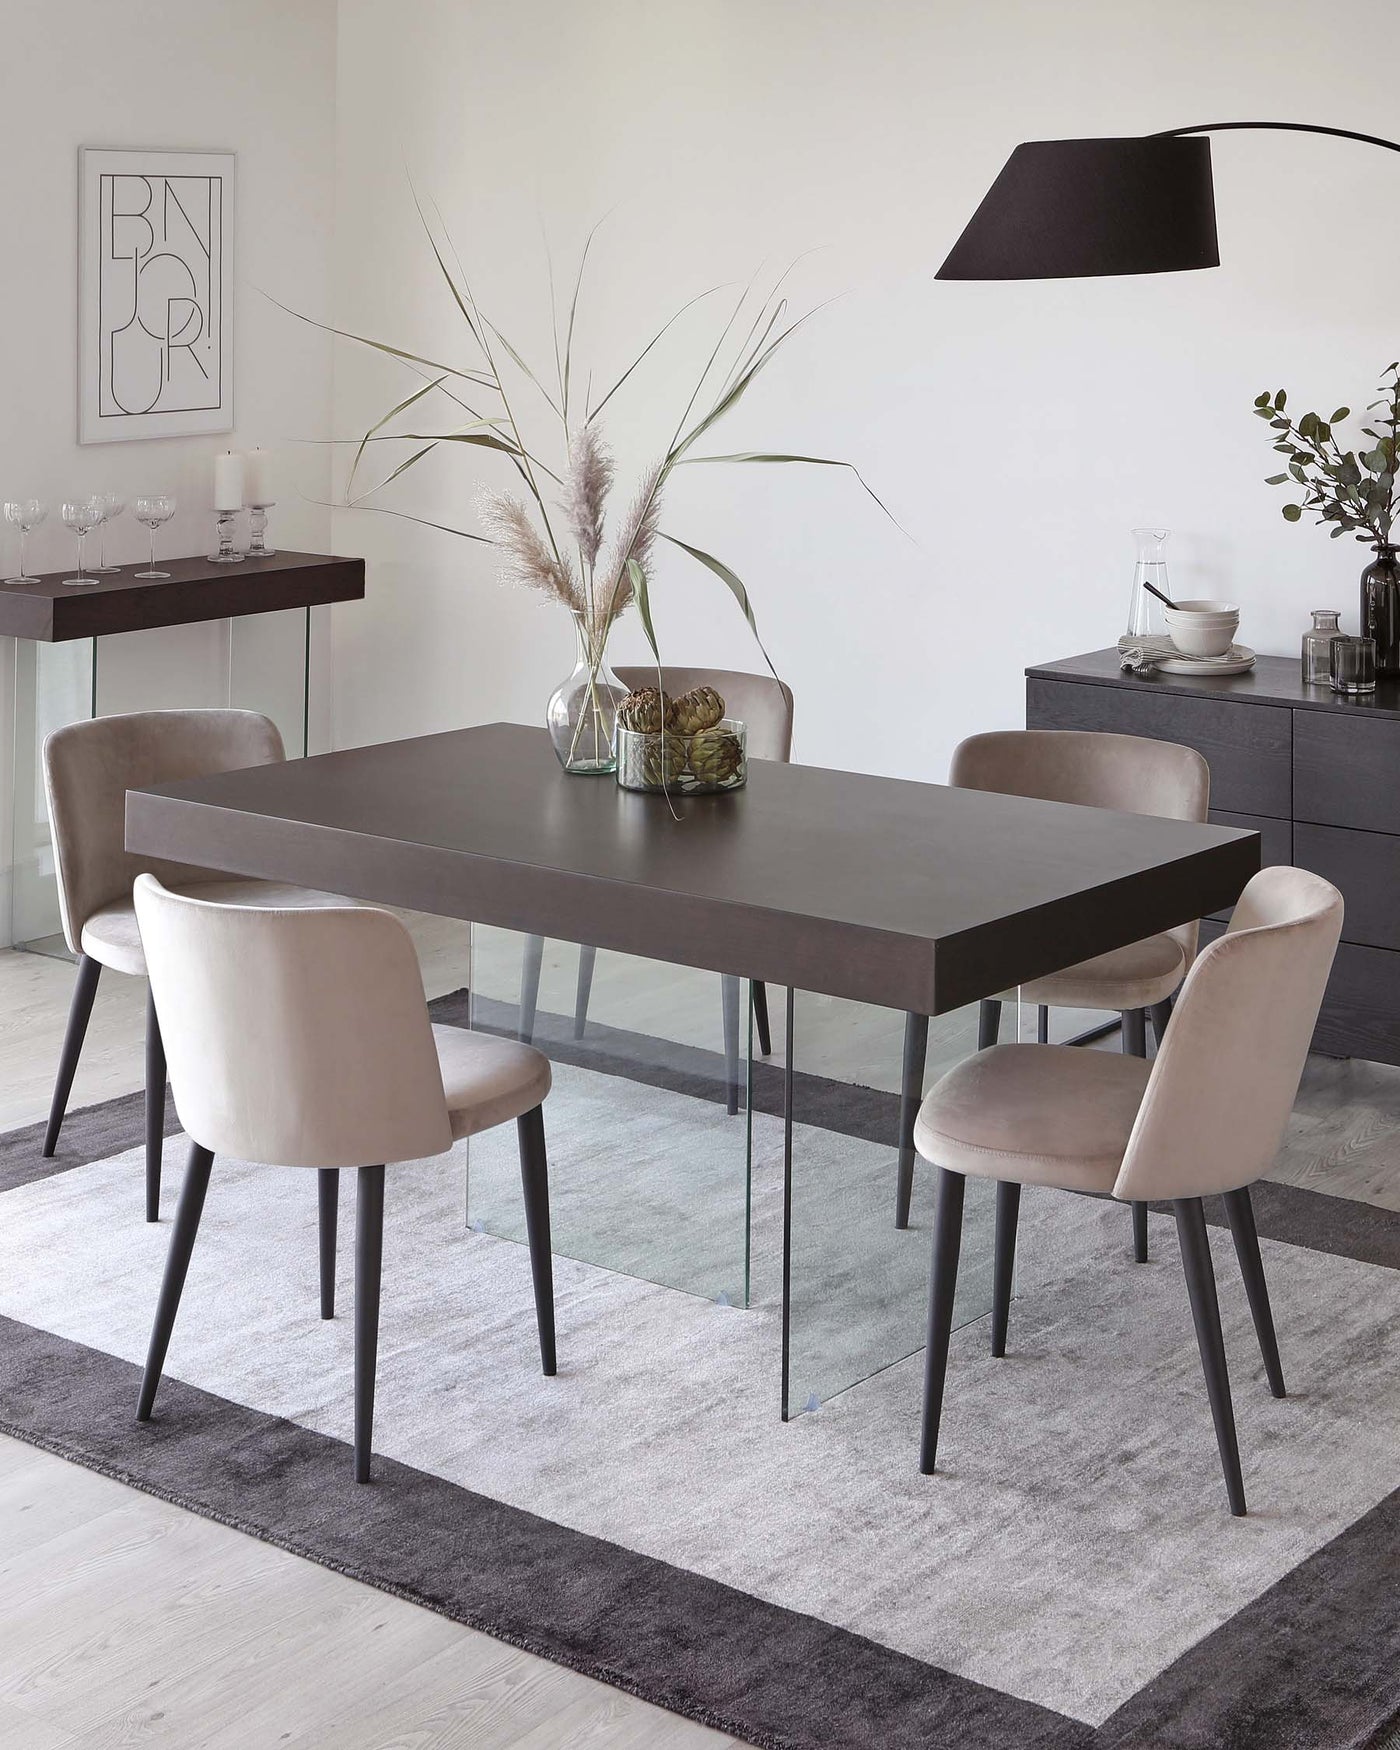 A modern dining room set composed of a rectangular dark brown table with glass legs and four upholstered chairs with a velvety beige finish and black legs. There is a sideboard in the background matching the table, and a minimalist black floor lamp with an oversized lampshade arches over the scene.